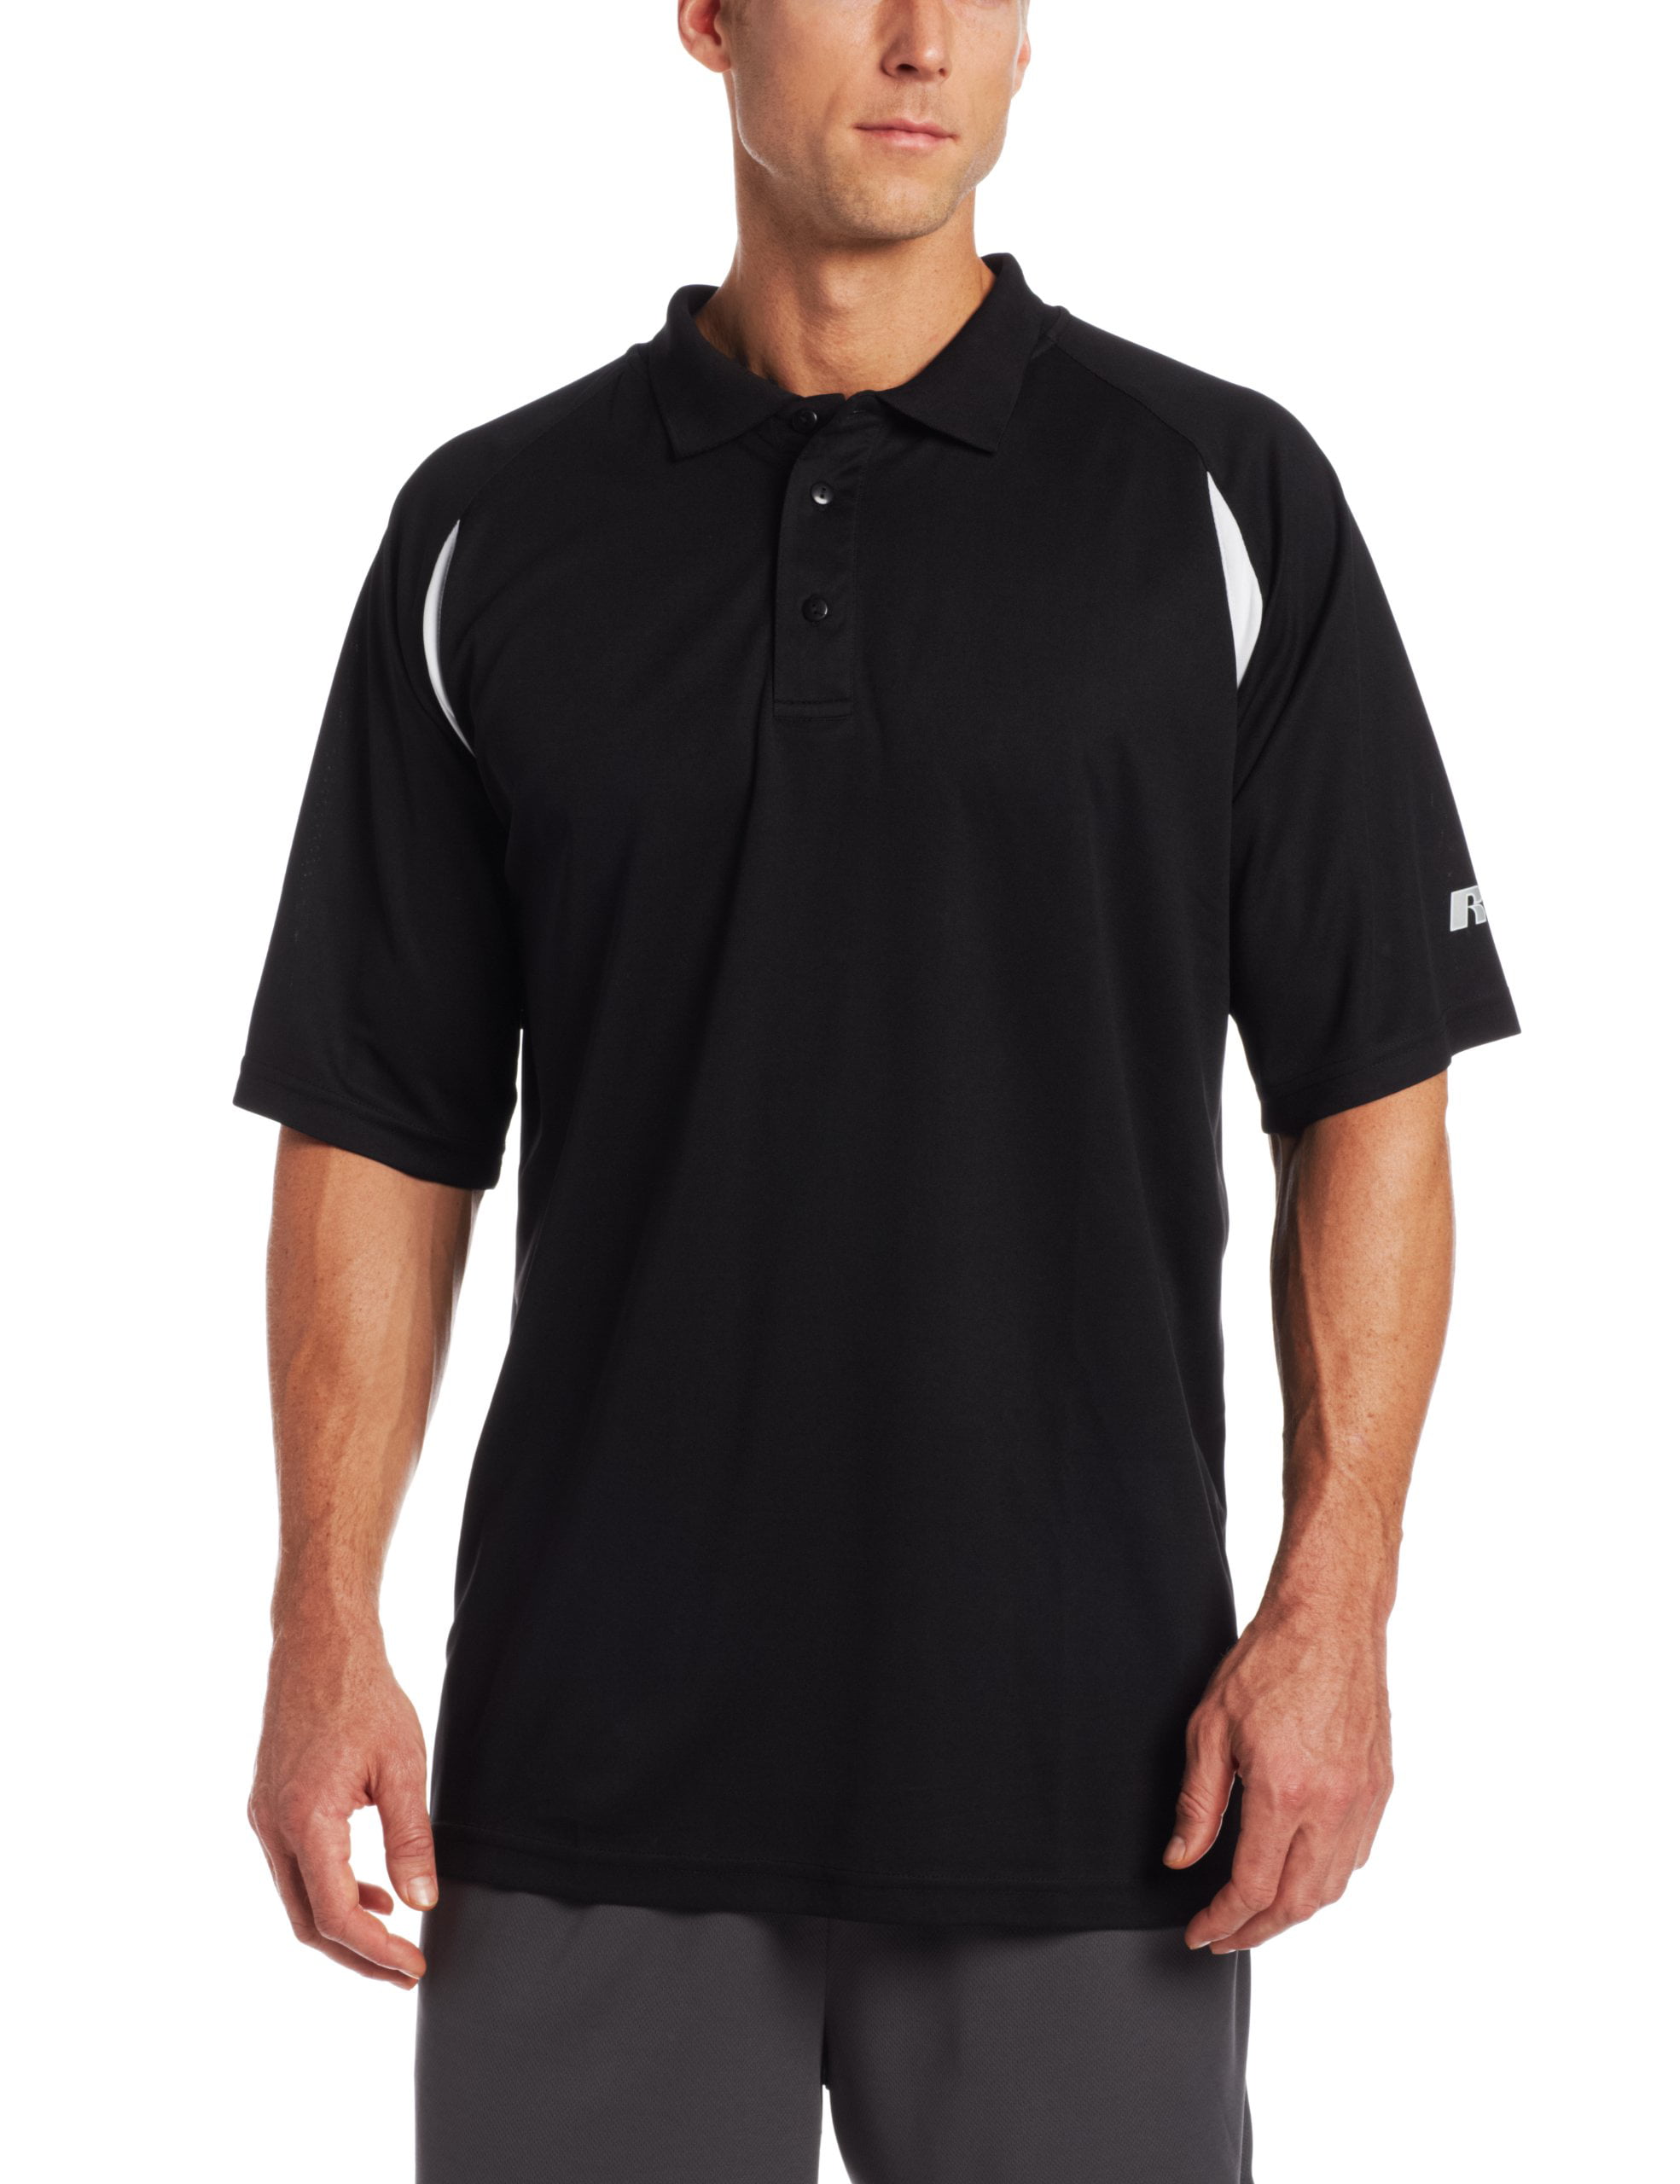 Russell Athletic - Russell Athletics Men's Big & Tall Color Blocked ...